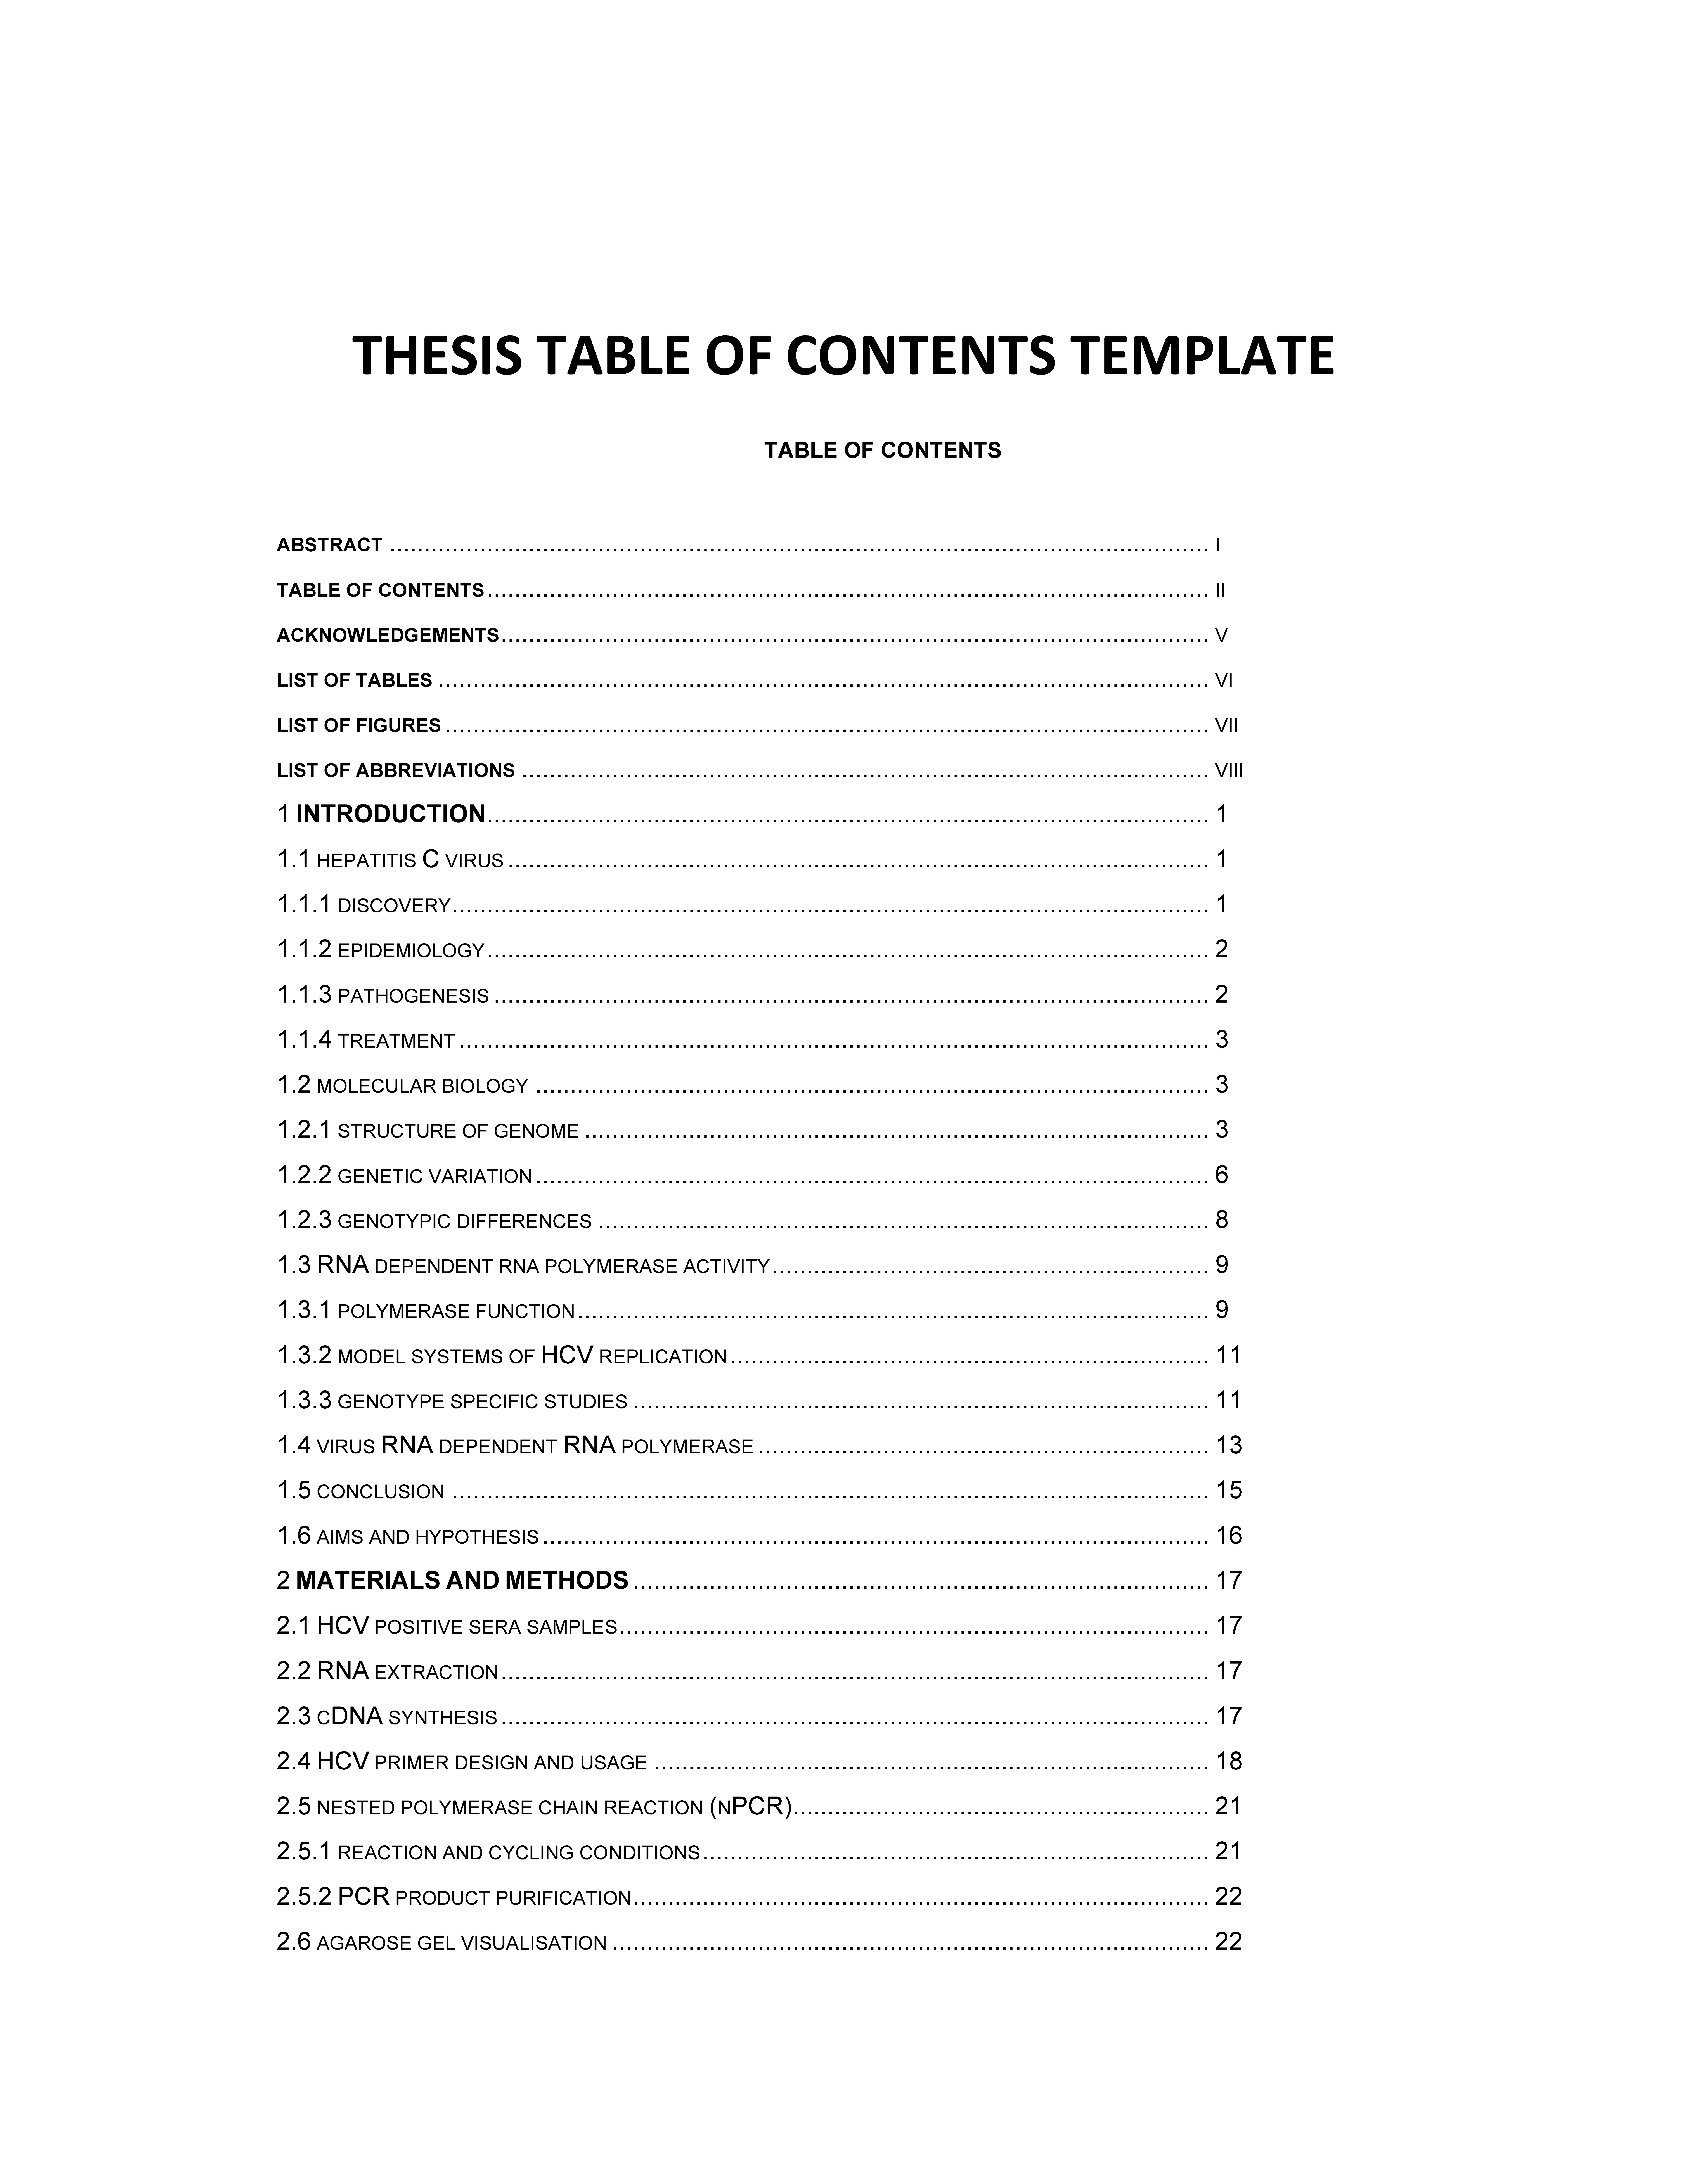 thesis table of contents template template